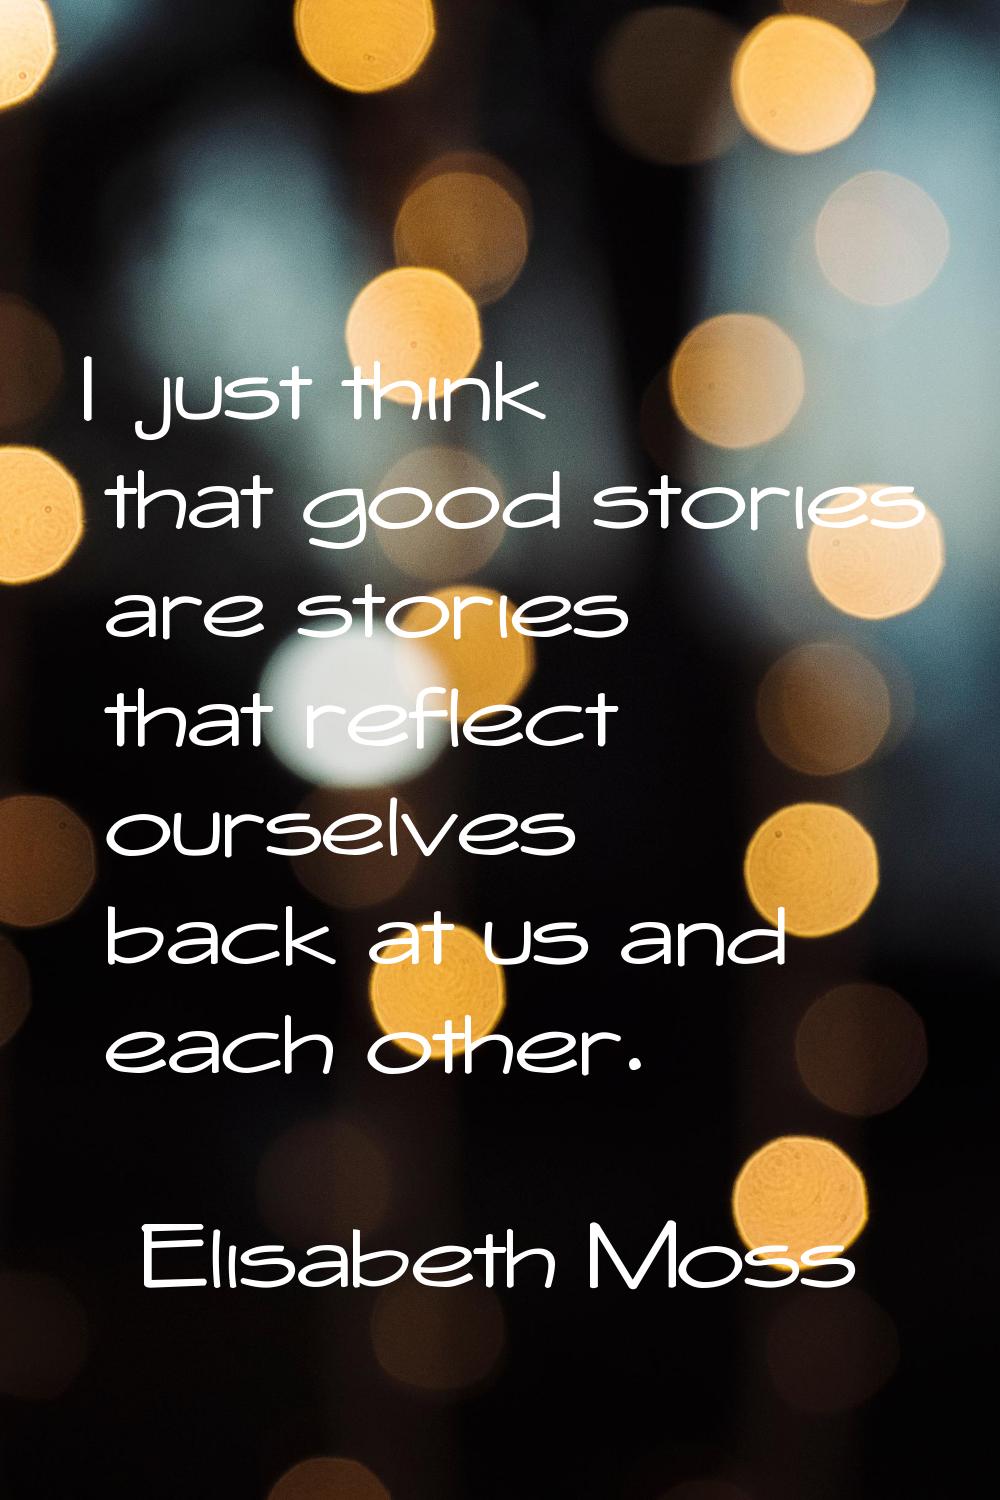 I just think that good stories are stories that reflect ourselves back at us and each other.